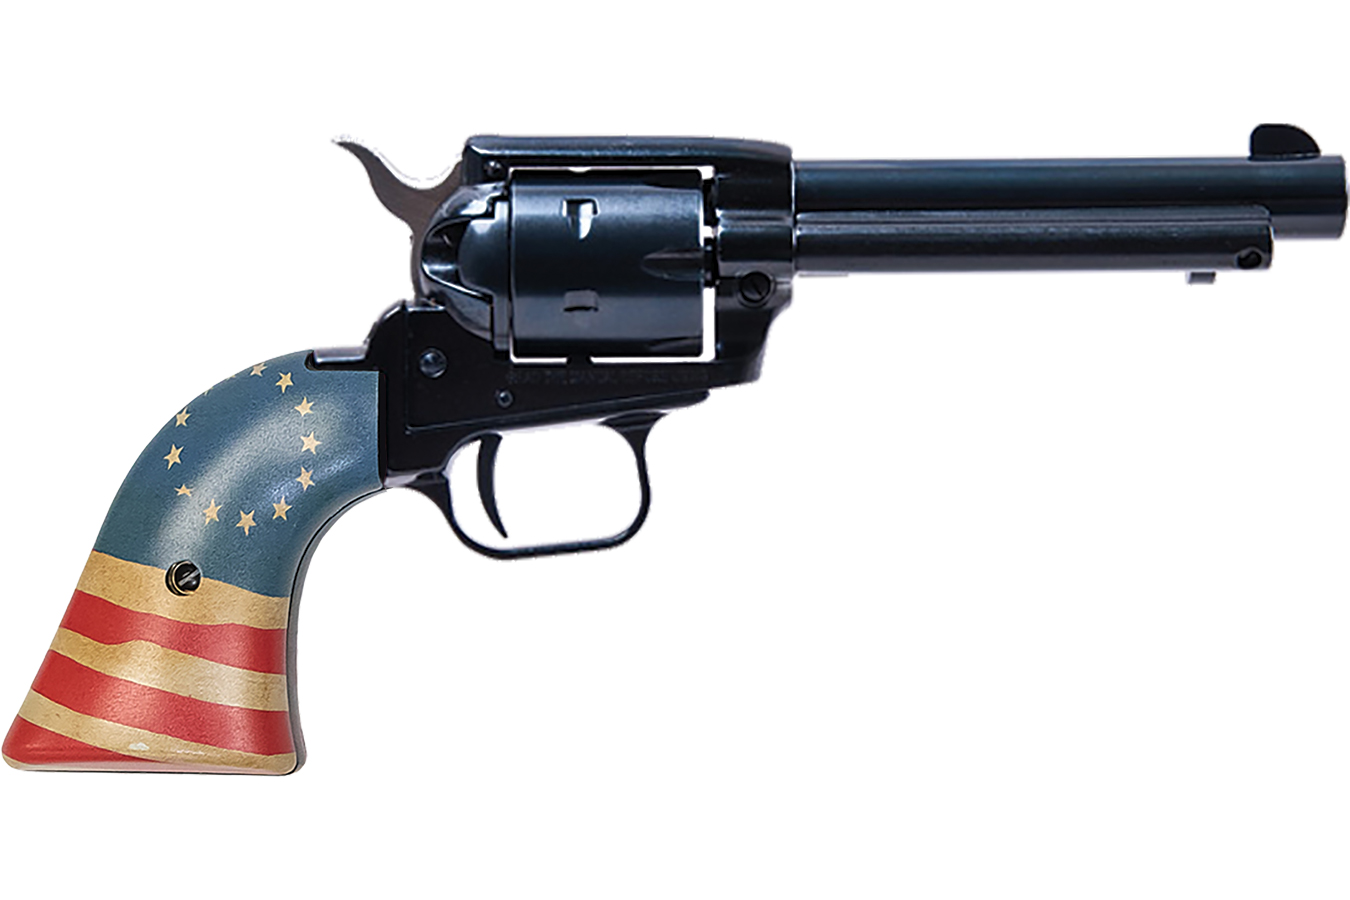 HERITAGE ROUGH RIDER 22LR HONOR BETSY ROSS 4.75 INCH